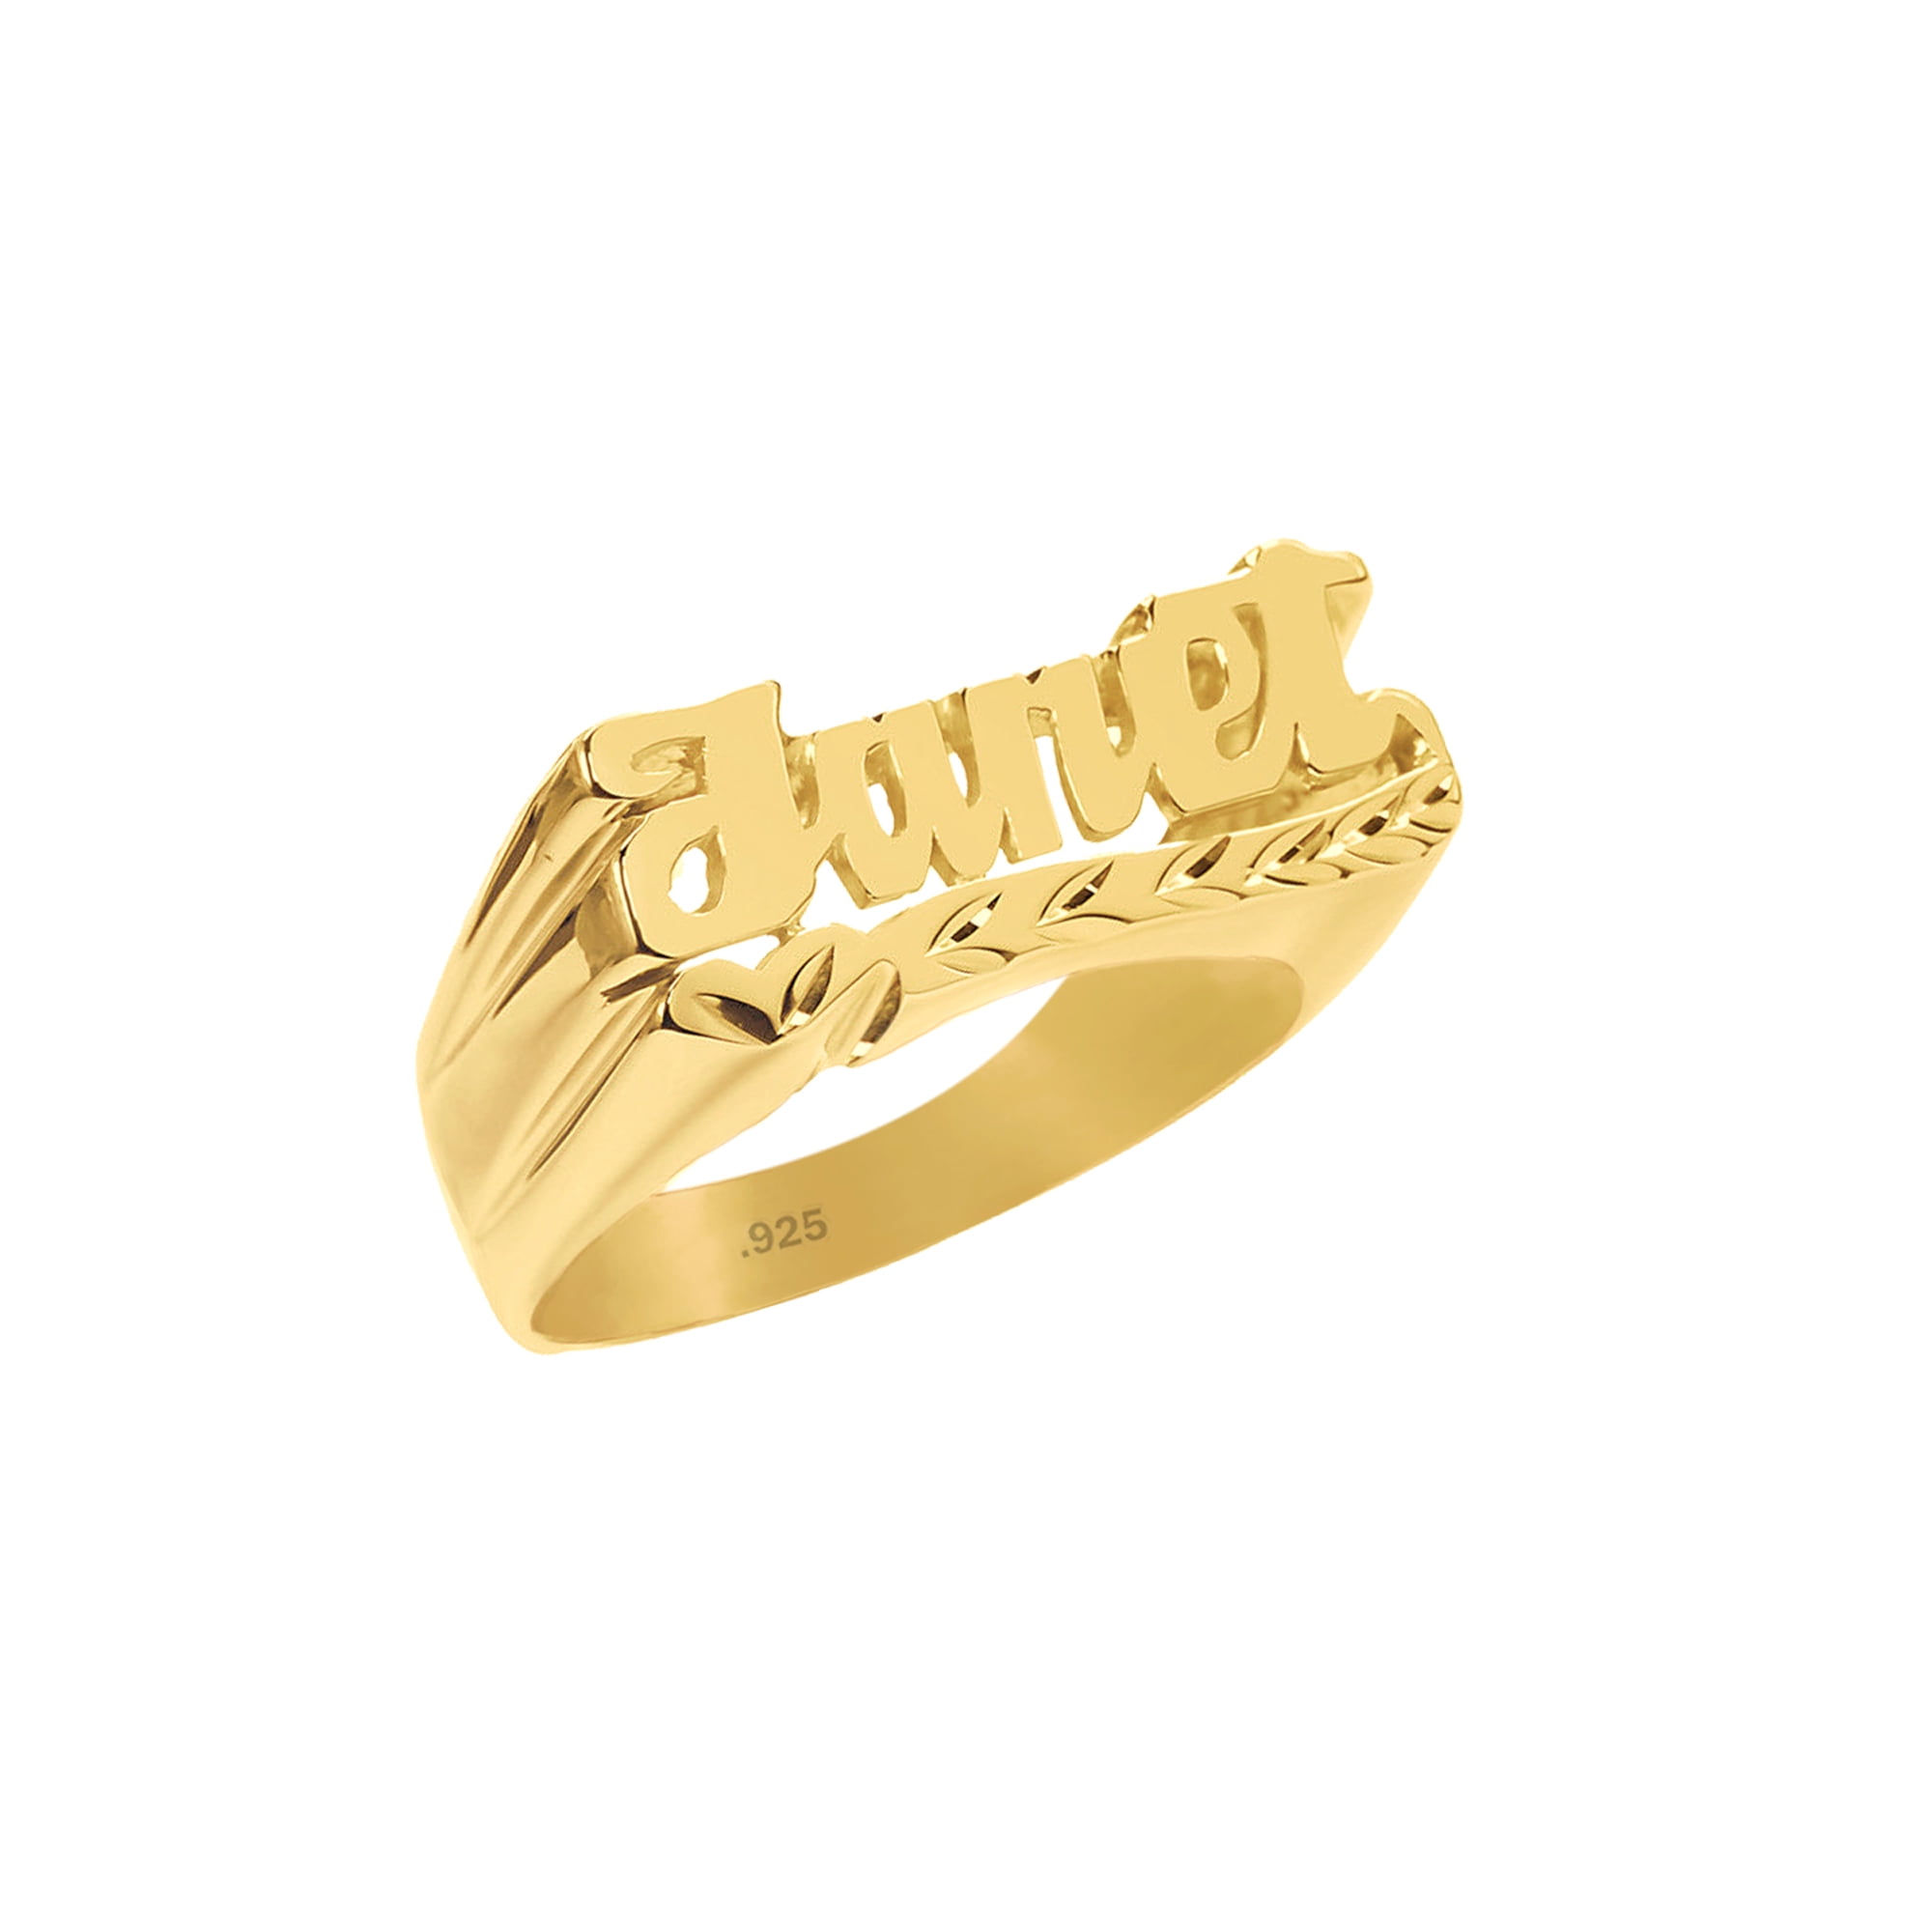 Gemiac Personalized Name Ring with Heart 18K Gold Plated Ring Unisex Custom  Nameplate Initial Ring Jewelry Gift for Women Men Girl Boy|Amazon.com